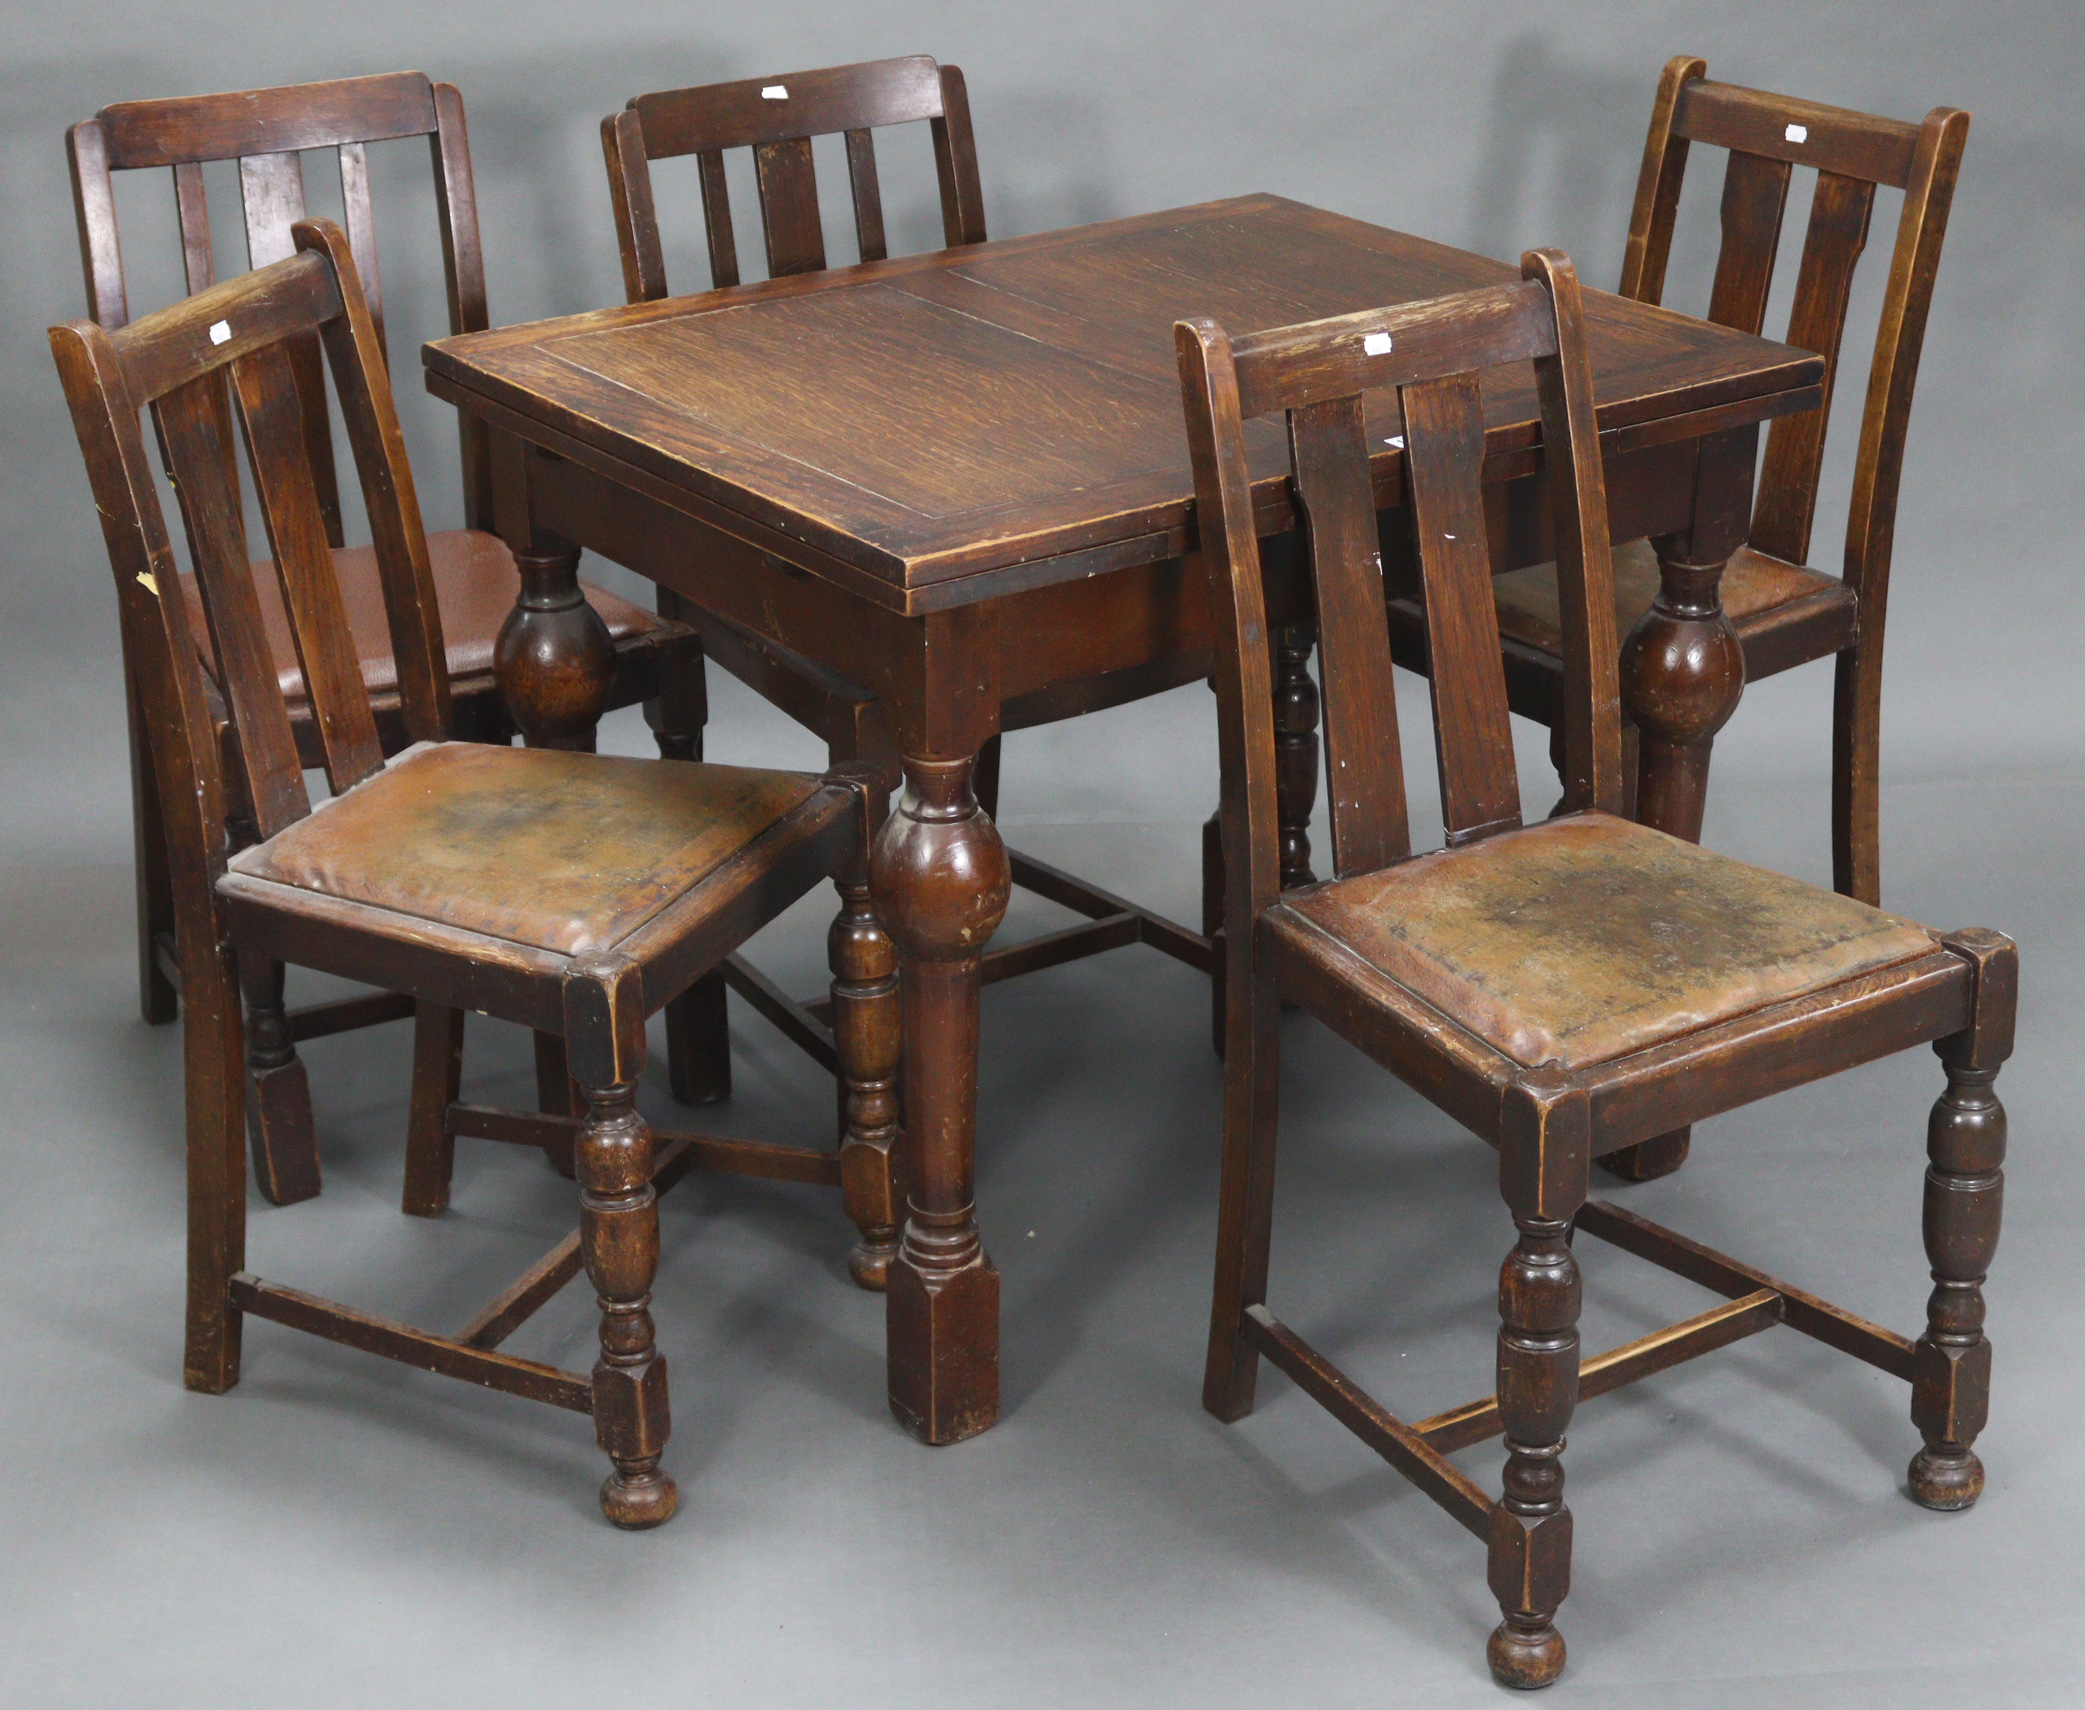 A mid-20th century oak draw-leaf dining table on four bulbous-turned legs, 29½” x 53¼” (open), & a